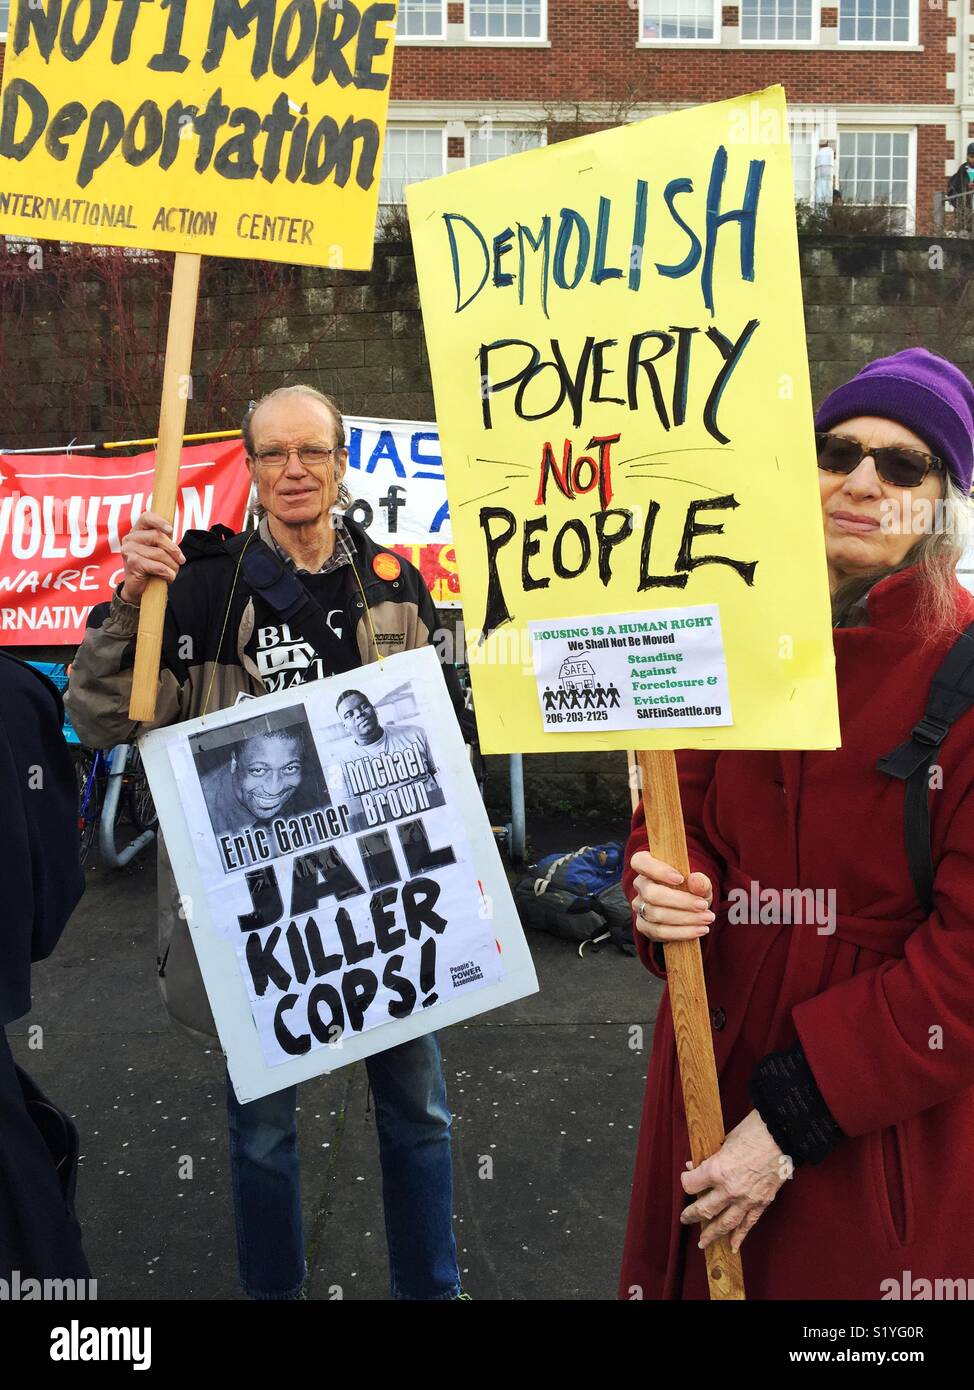 Middle aged man and woman holding protest signs during Dr..MLK JR. march in Seattle, WA Stock Photo